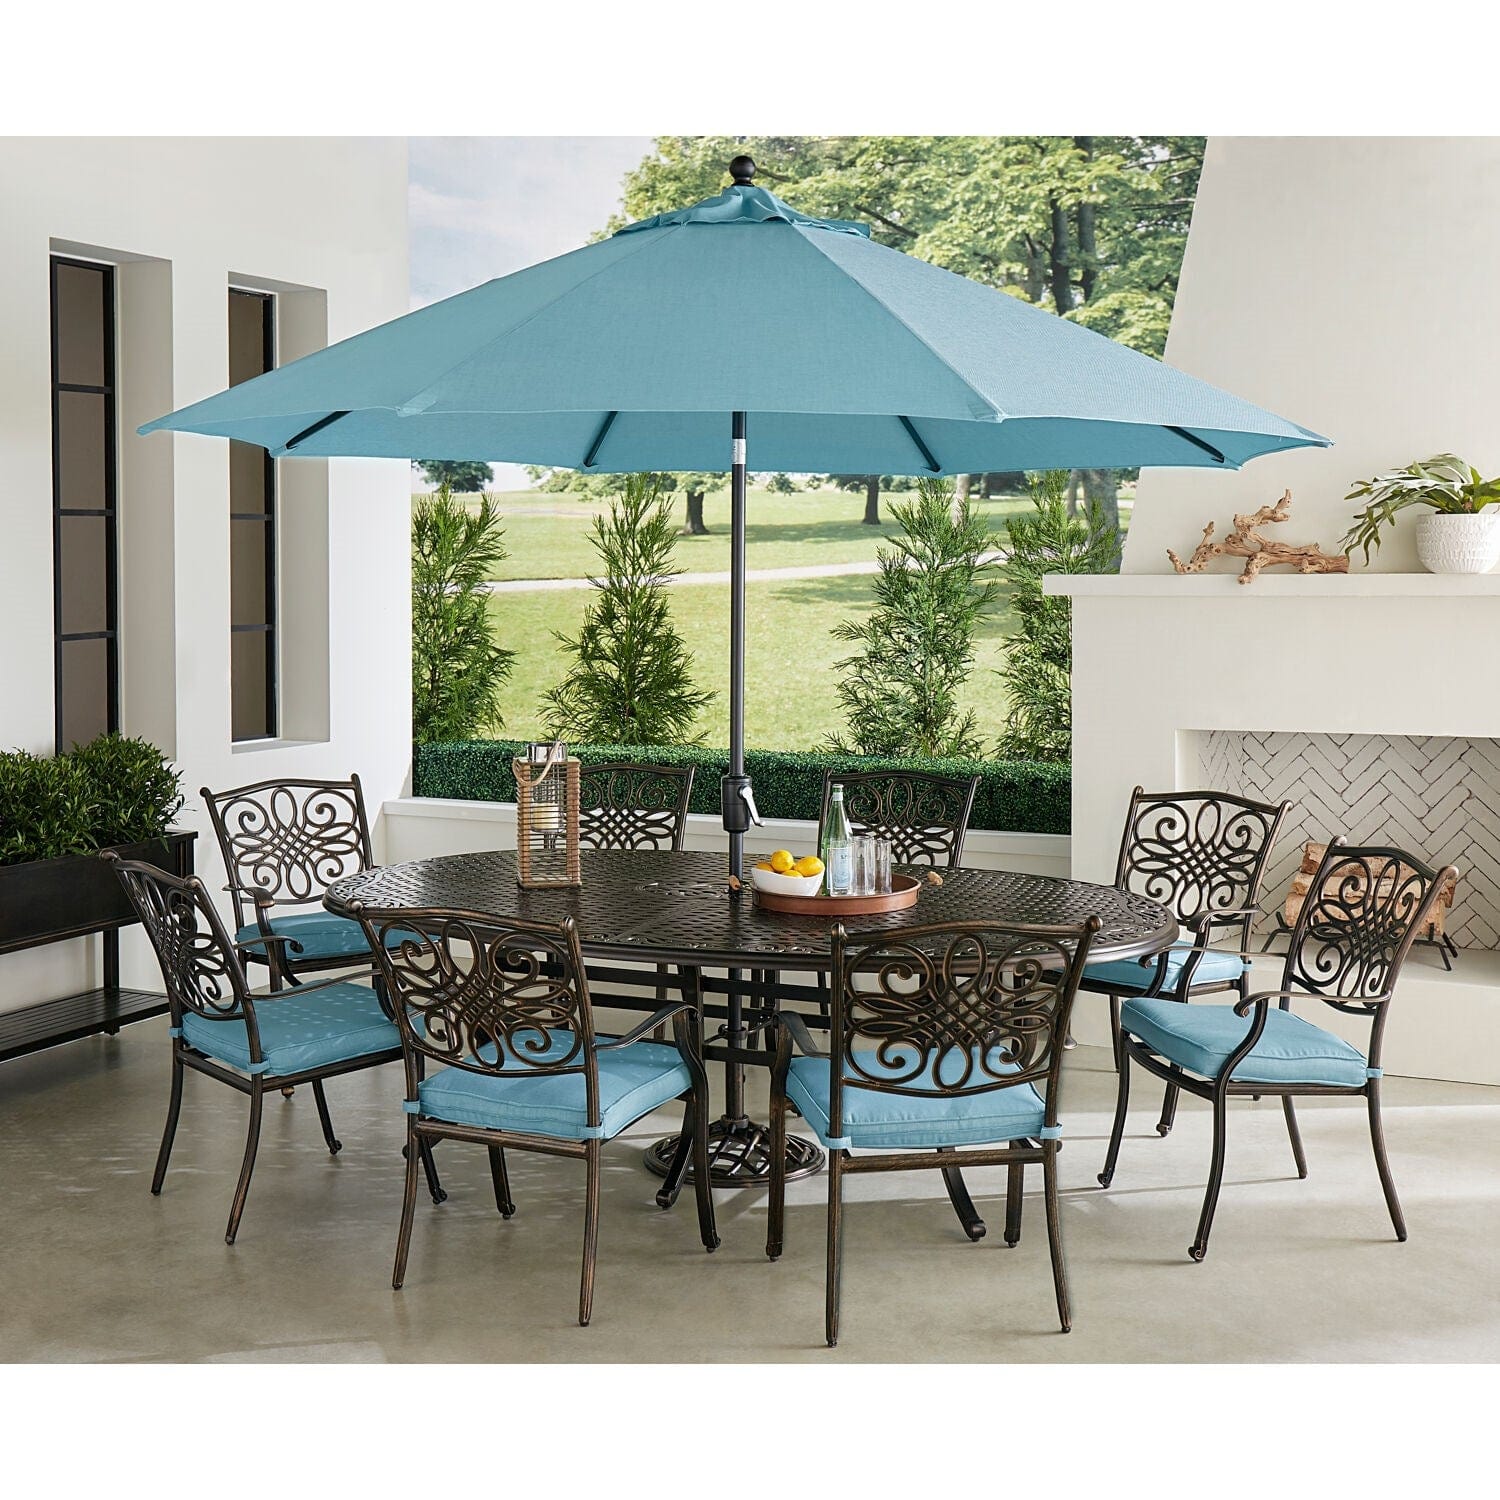 Hanover Outdoor Dining Set Hanover Traditions 9-Piece Aluminium Frame Dining Set in Blue with 8 Dining Chairs, 95-in. x 60-in. Oval Cast-Top Table, Umbrella and Stand | TRADDN9PCOV-SU-B